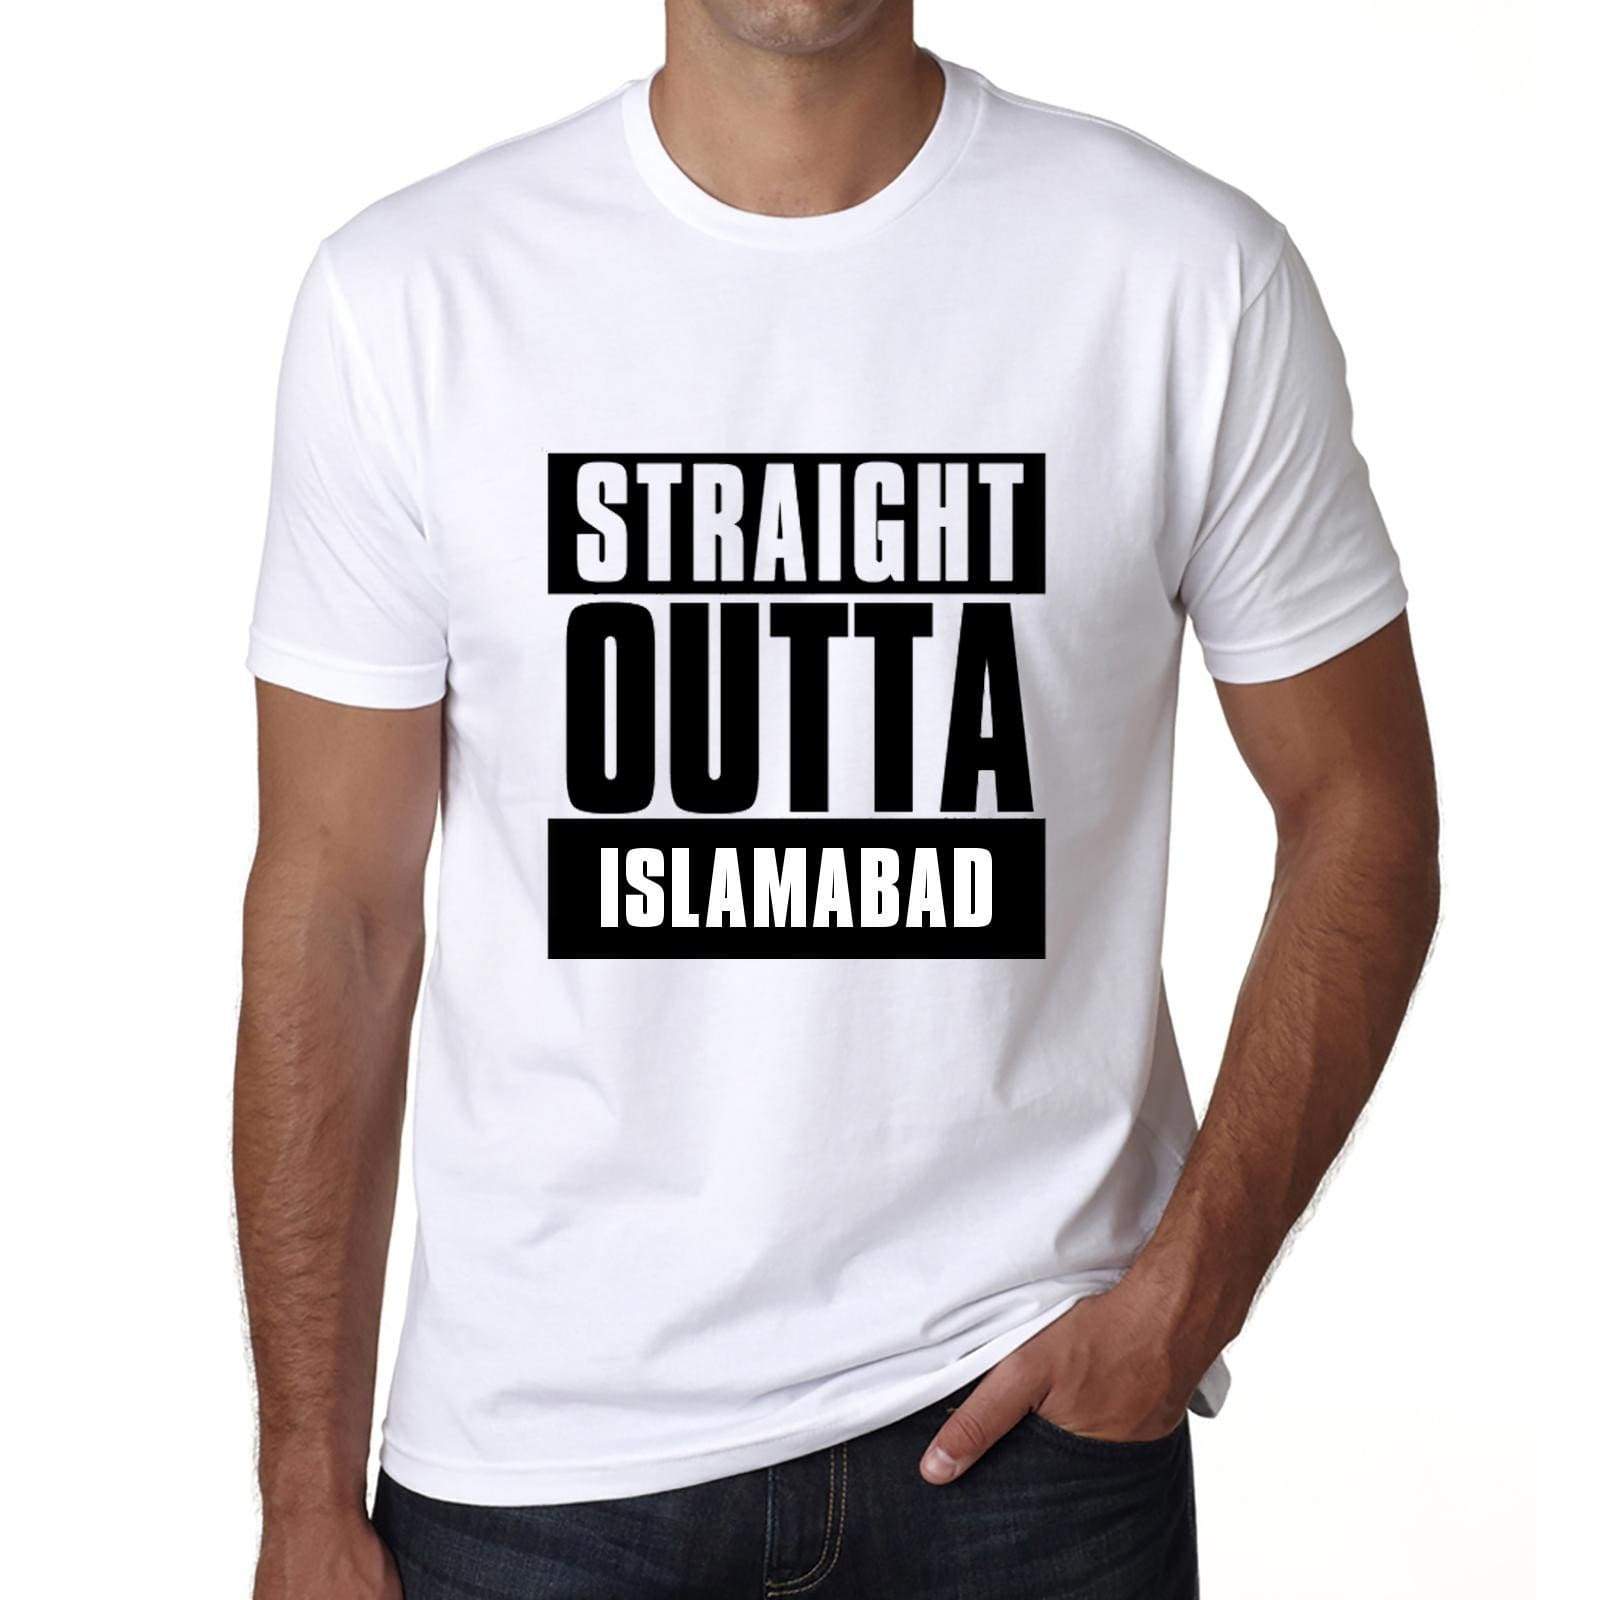 Straight Outta Islamabad Mens Short Sleeve Round Neck T-Shirt 00027 - White / S - Casual